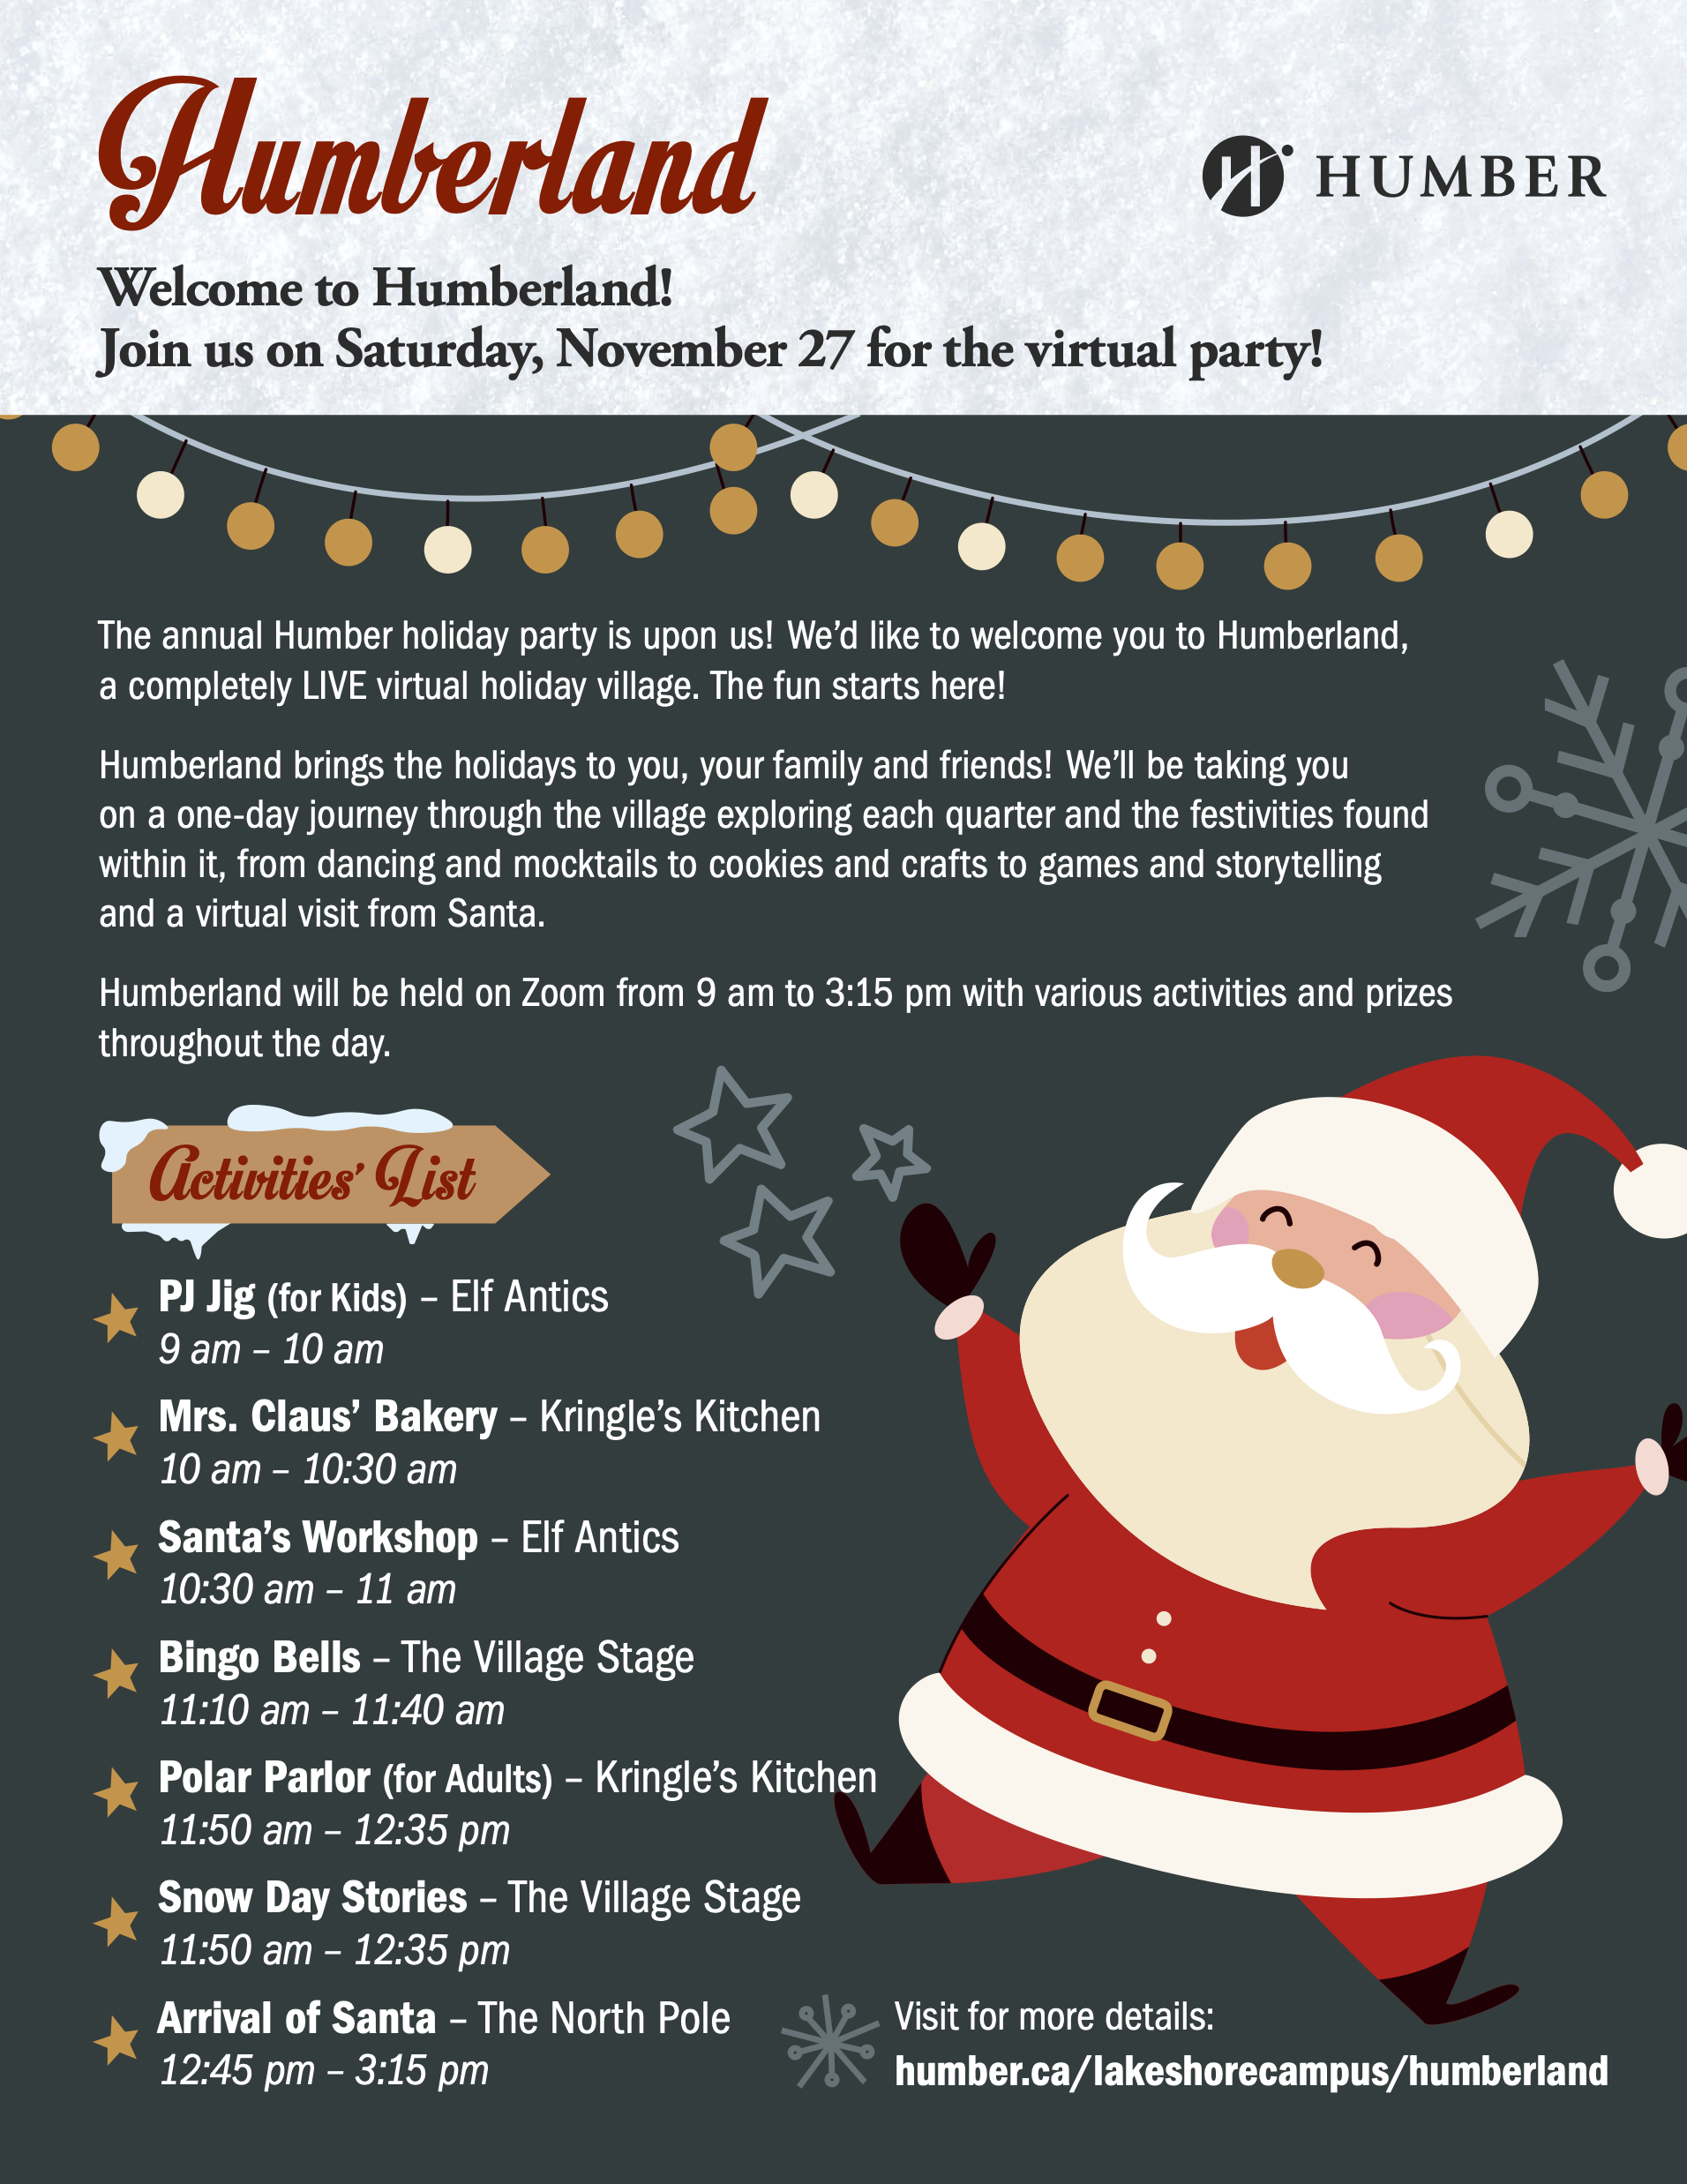 Cartoon image of Santa with schedule of events for Humberland